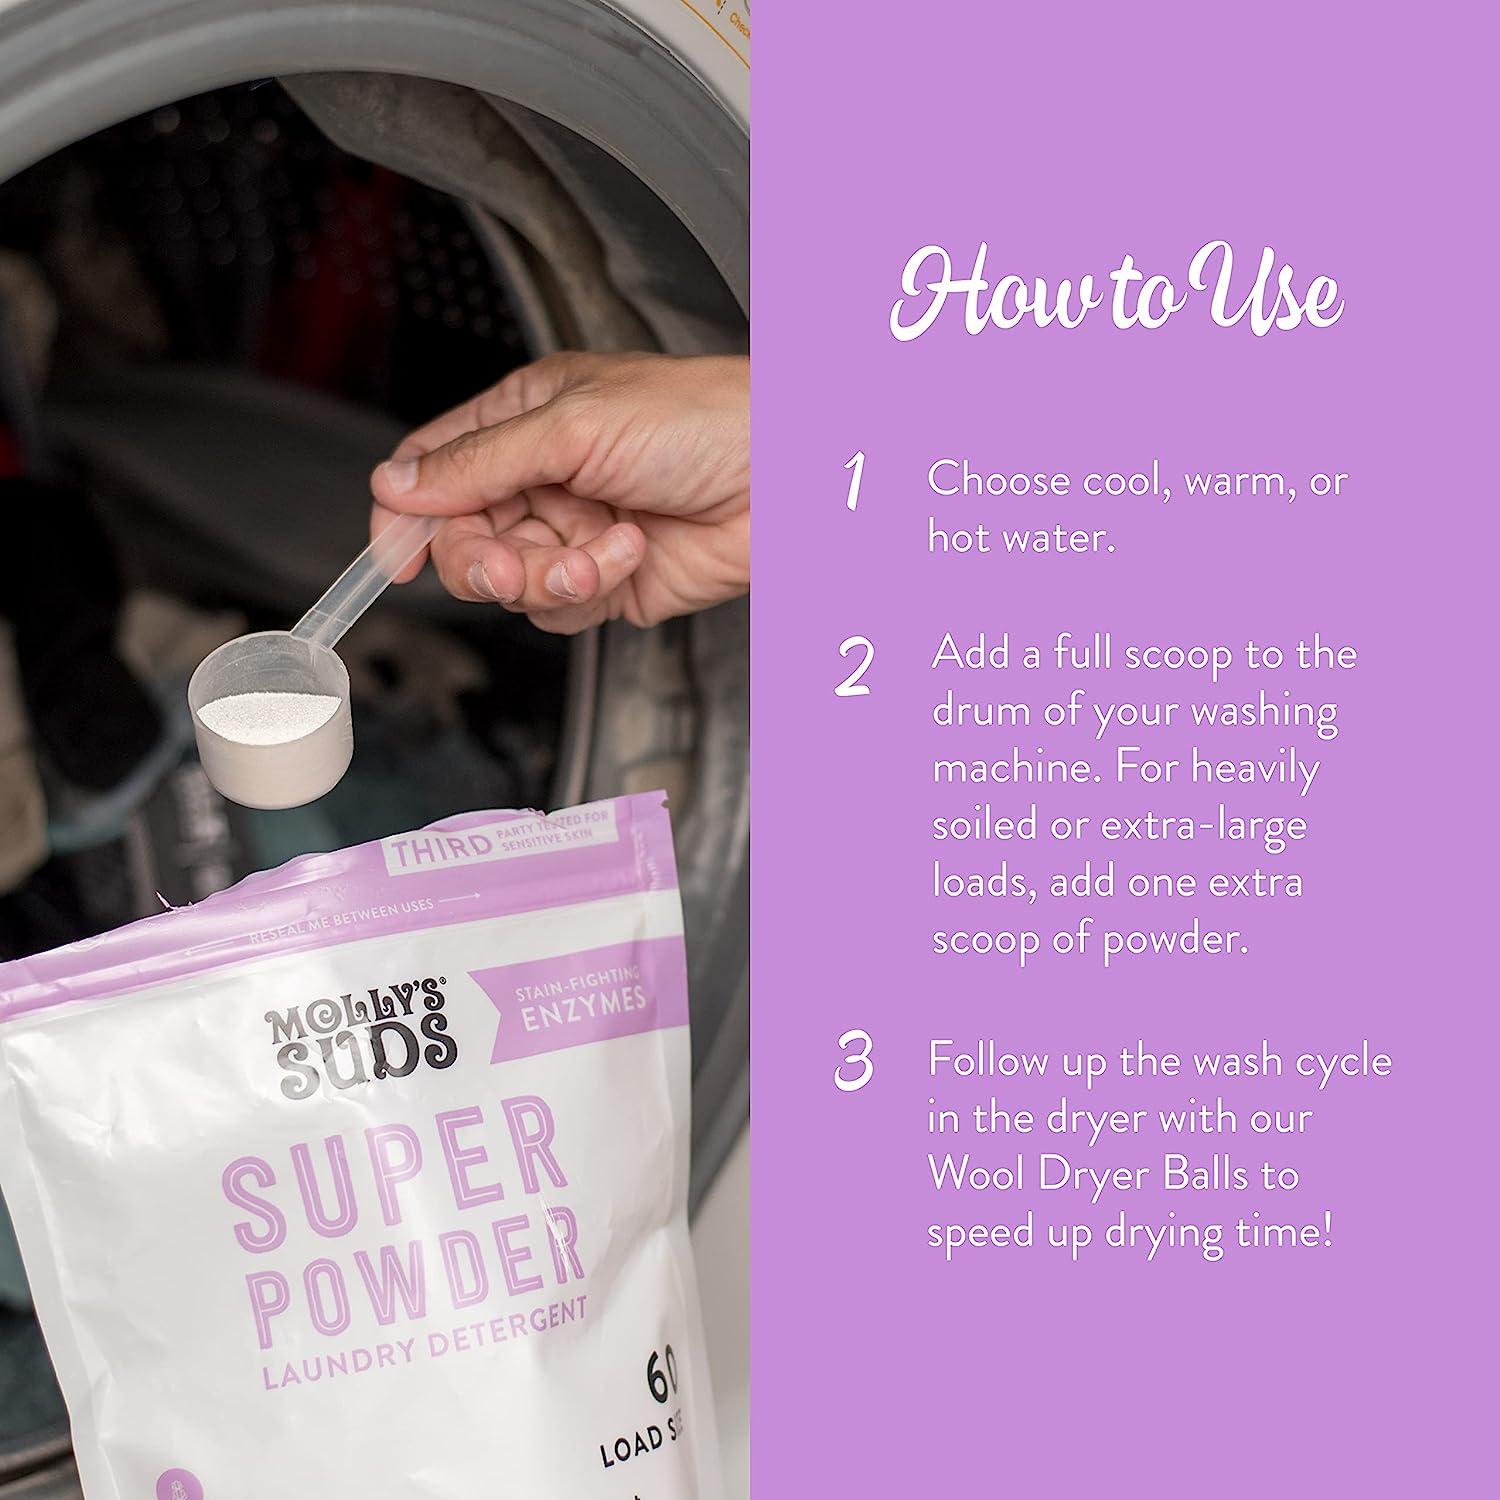 Molly's Suds Super Powder Detergent, Natural Extra Strength Laundry Soap,  Stain Fighting & Safe for Sensitive Skin, Earth Derived Ingredients